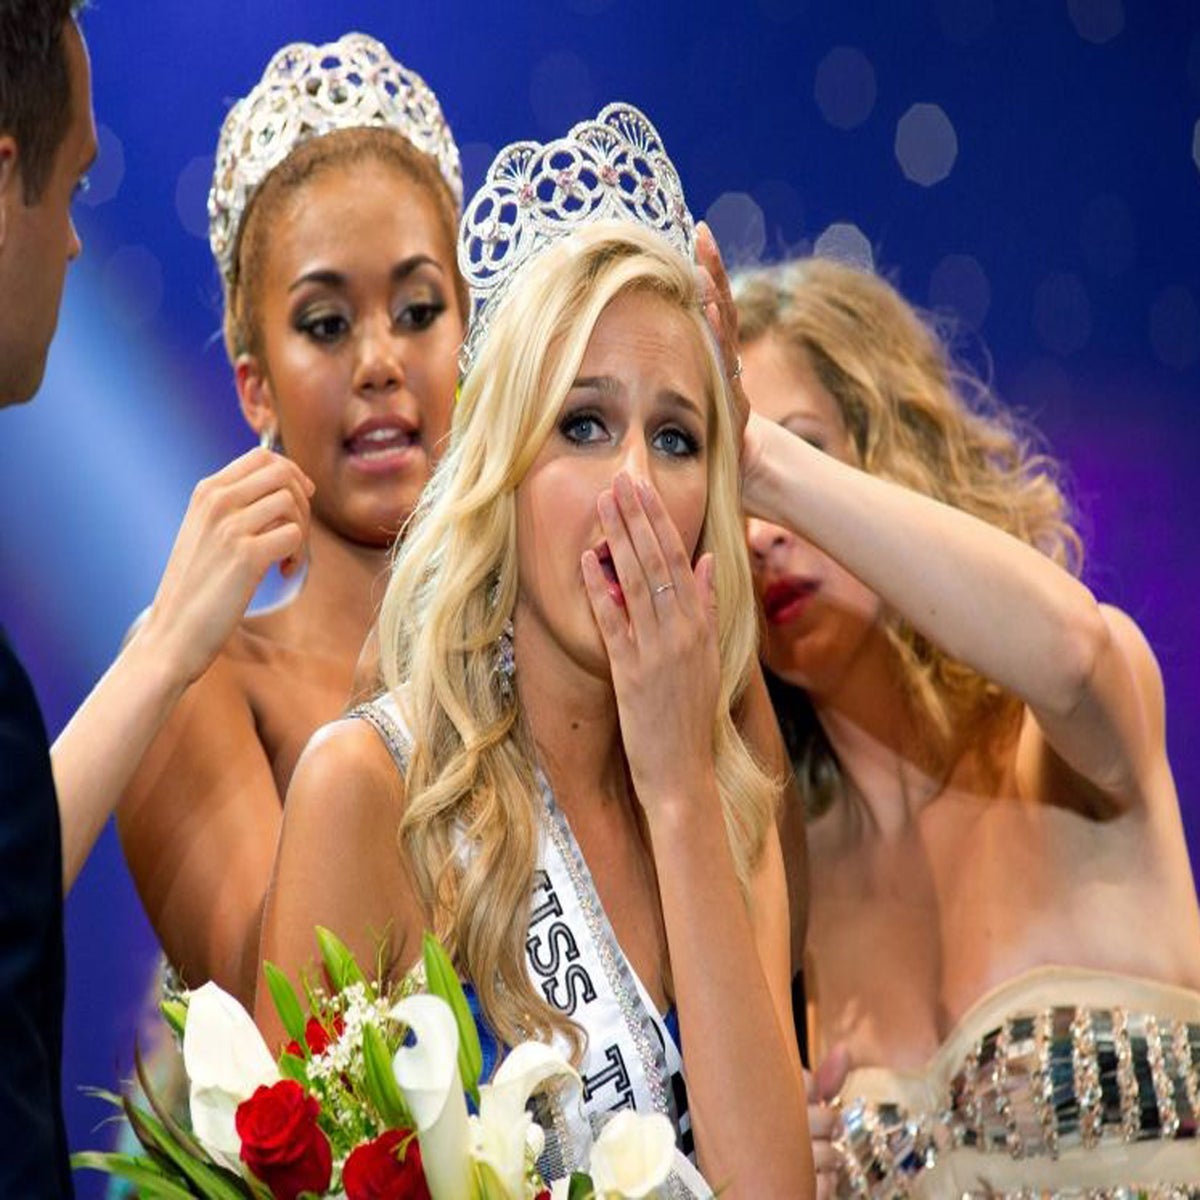 Vintage Nudist Beauty Contests - Former classmate pleads guilty to 'sextortion' after hacking into webcam of  Miss Teen USA Cassidy Wolf | The Independent | The Independent